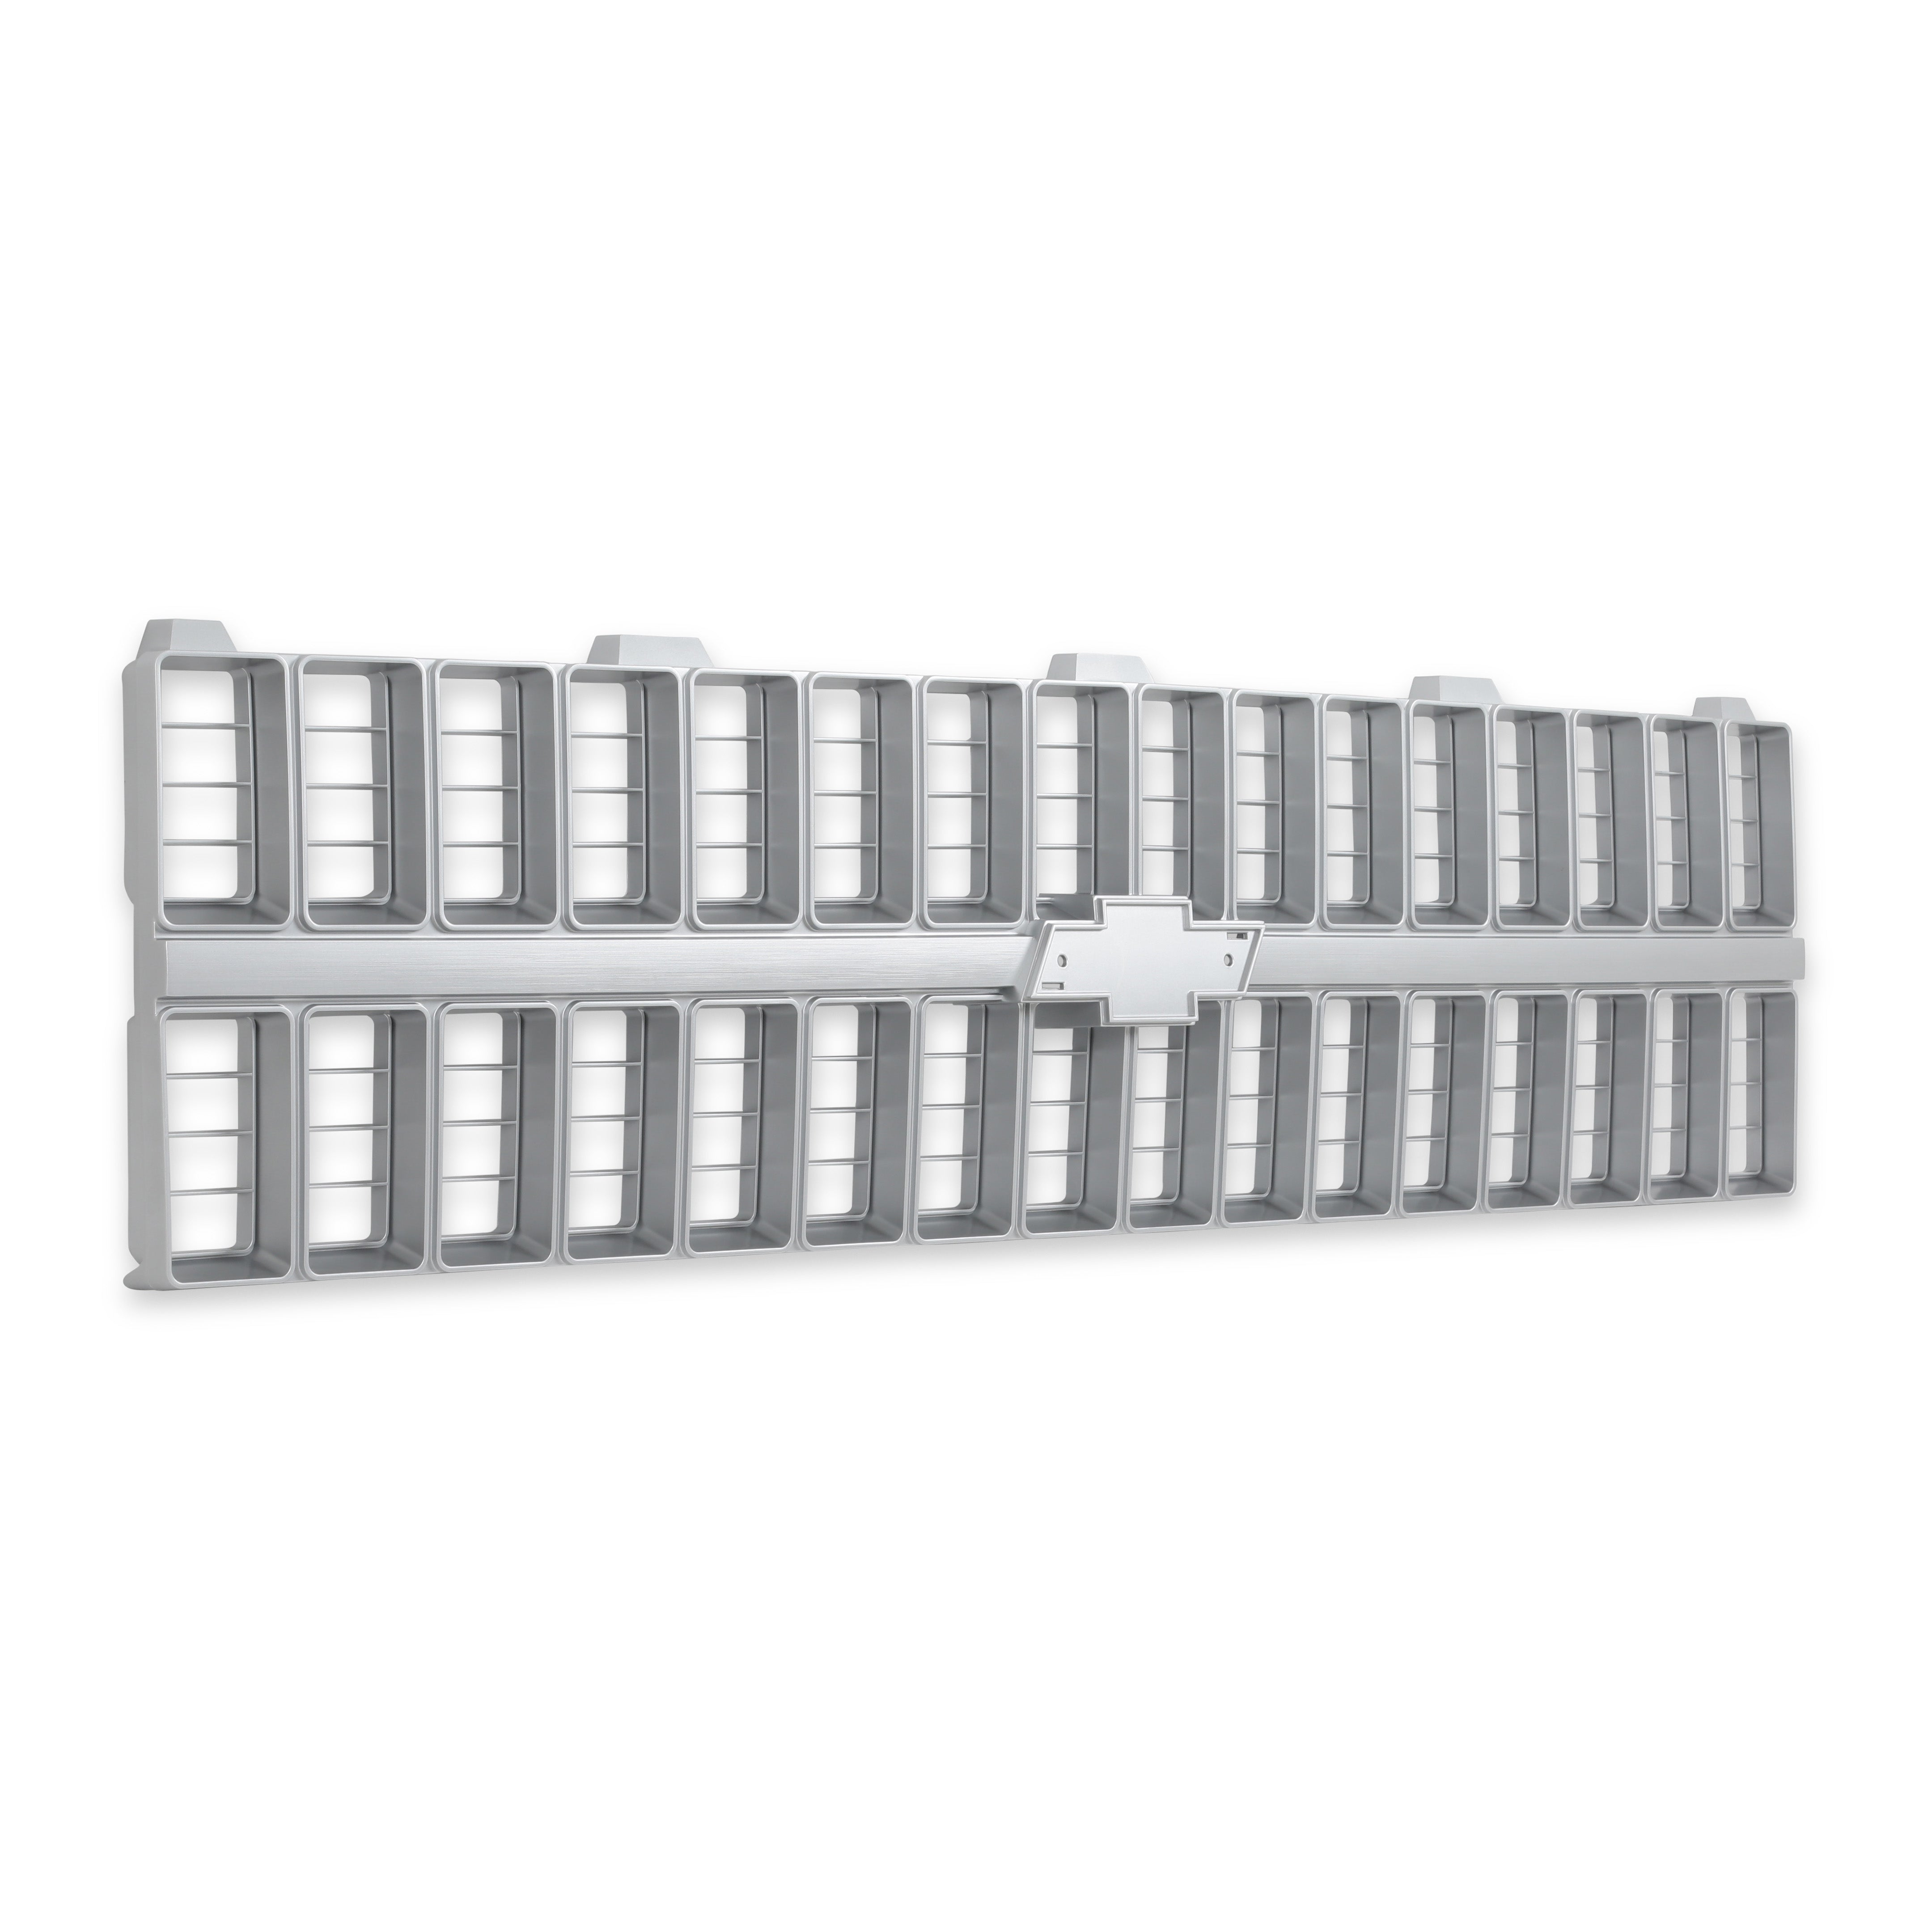 BROTHERS C/K Chevy Grille - w/ Bowtie Mounts - Silver pn 04-175